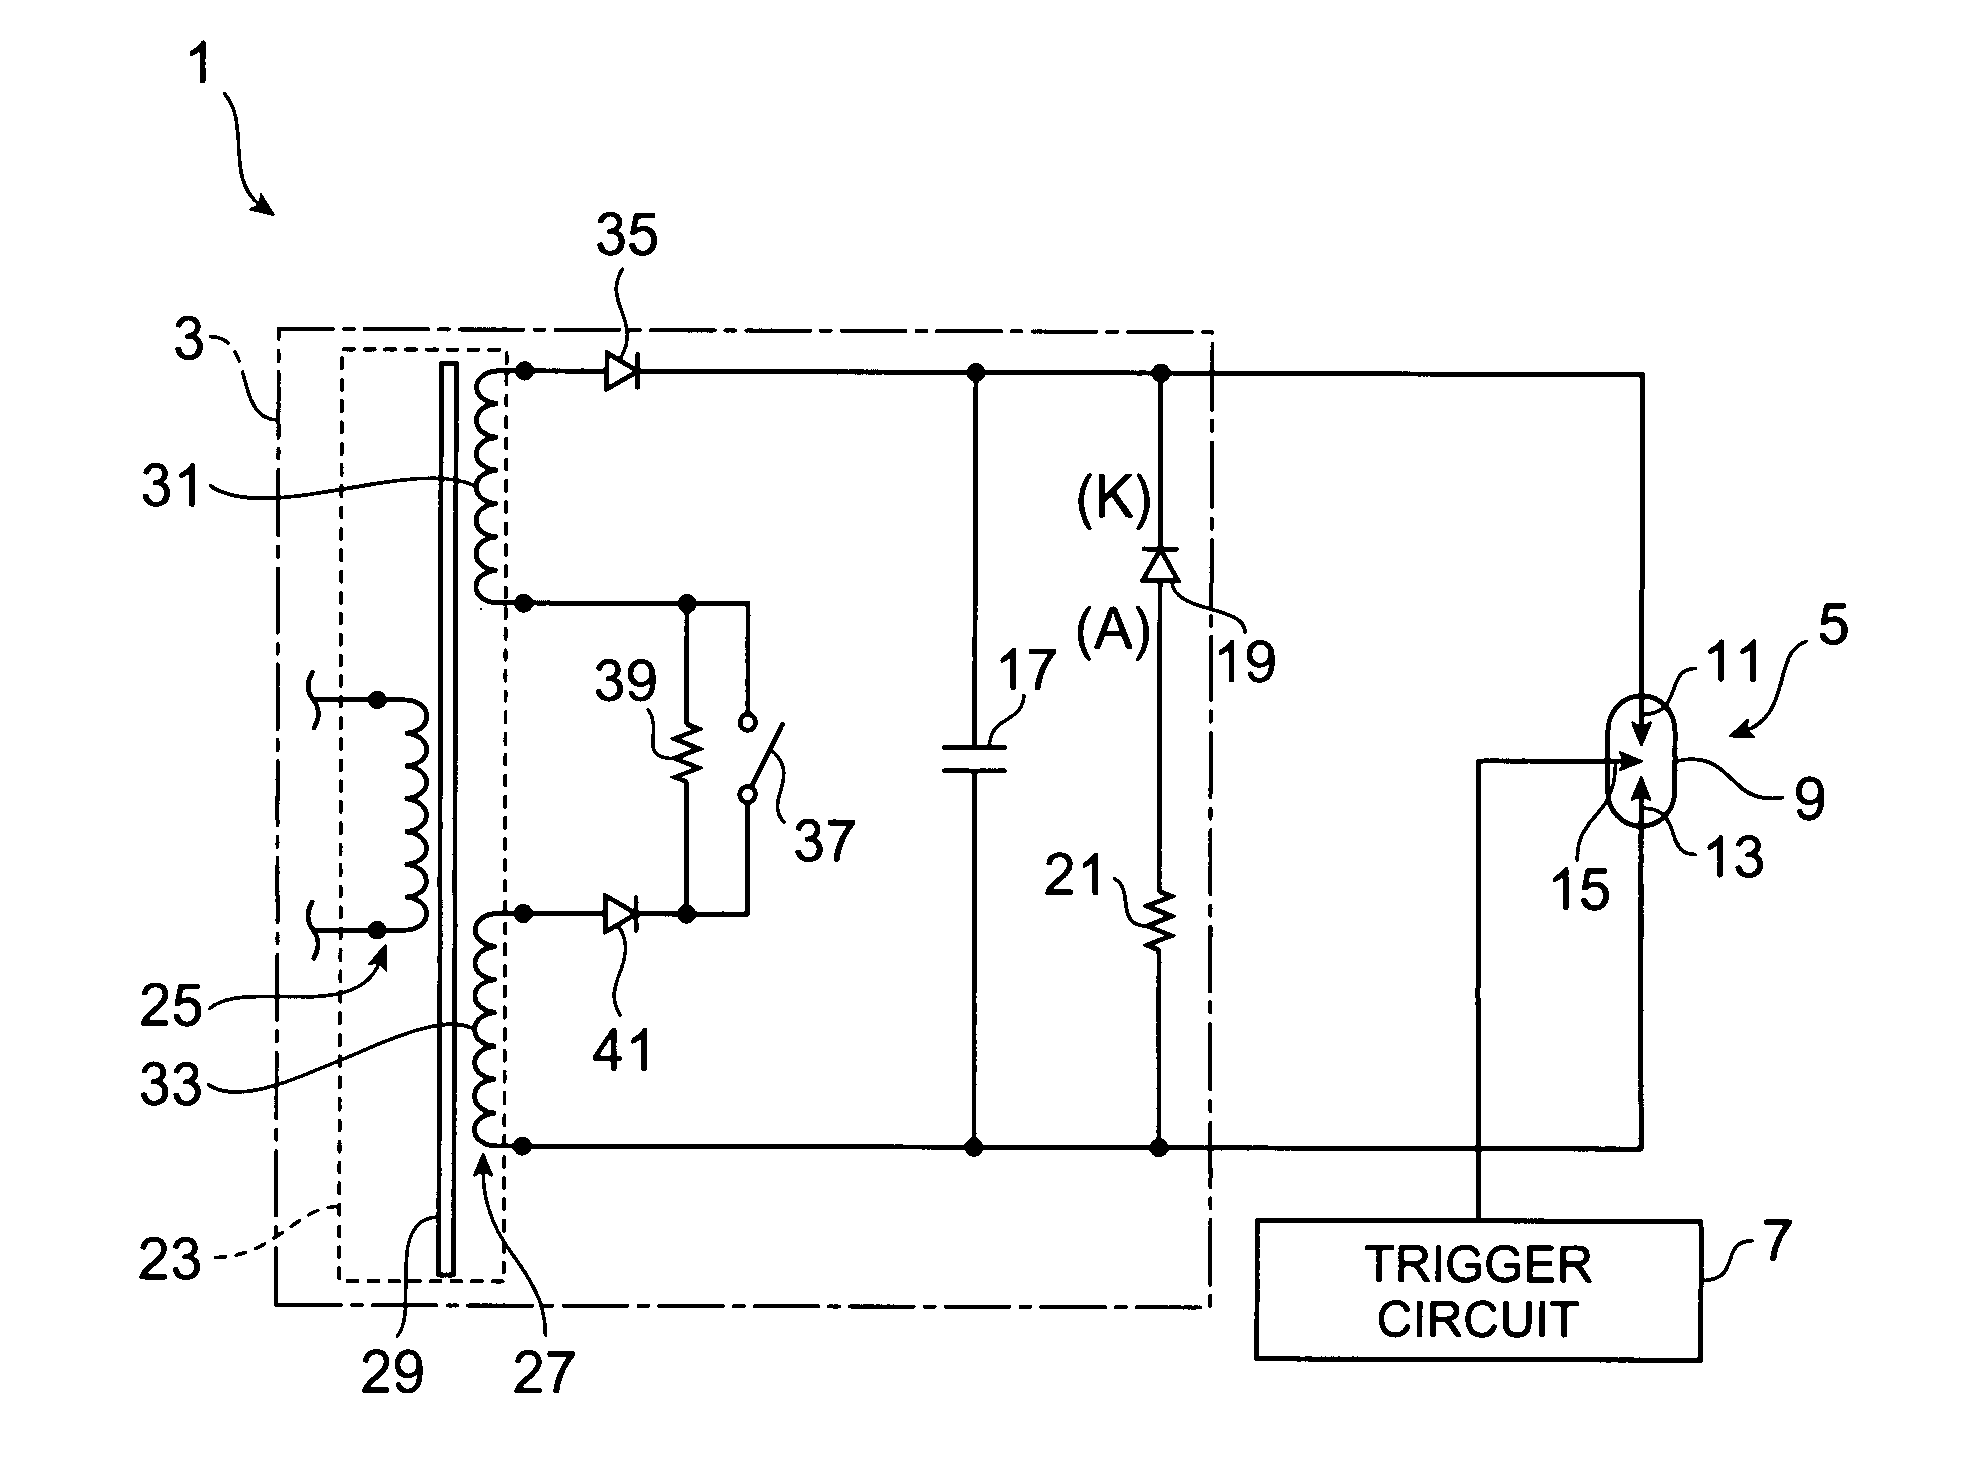 Power supply circuit for flash discharge tube